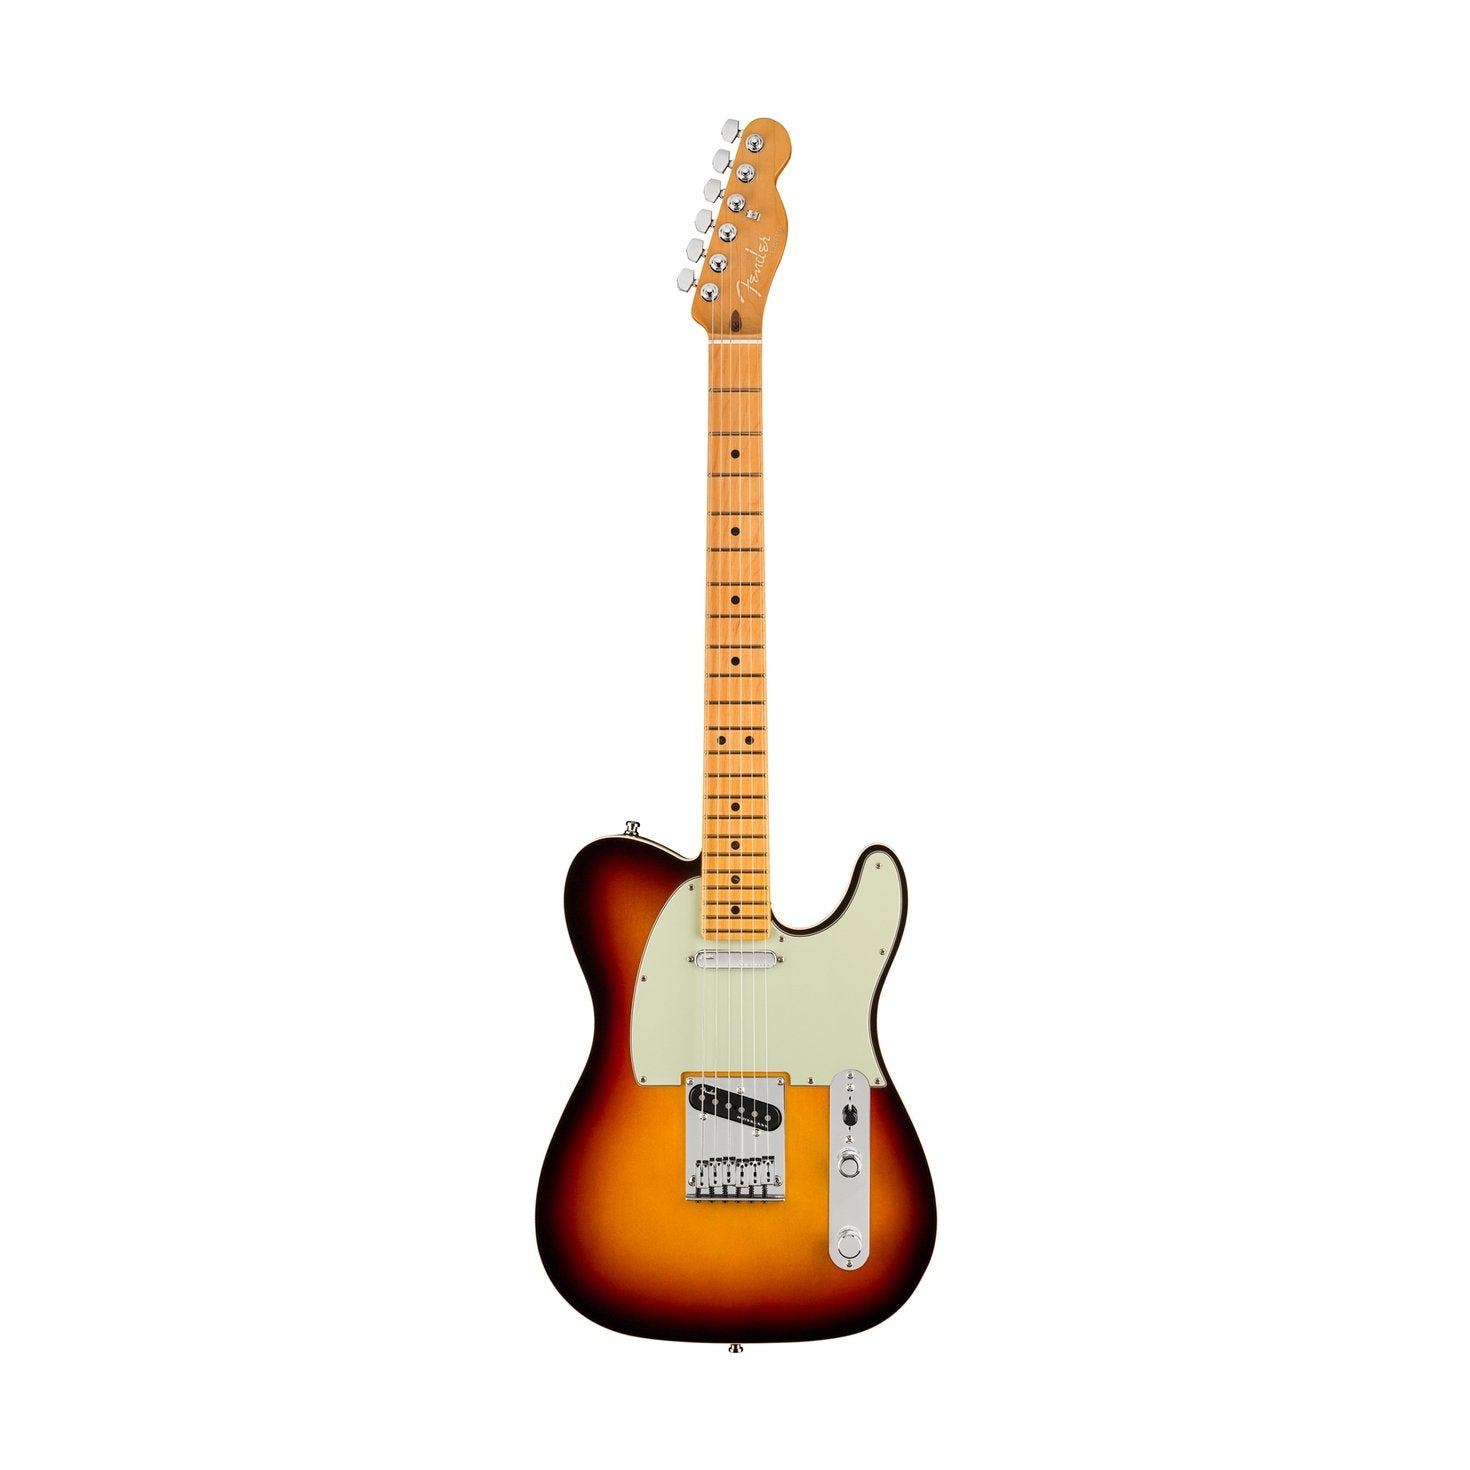 Fender American Ultra Telecaster Electric Guitar, Maple FB, Ultraburst, FENDER, ELECTRIC GUITAR, fender-electric-guitar-f03-011-8032-712, ZOSO MUSIC SDN BHD